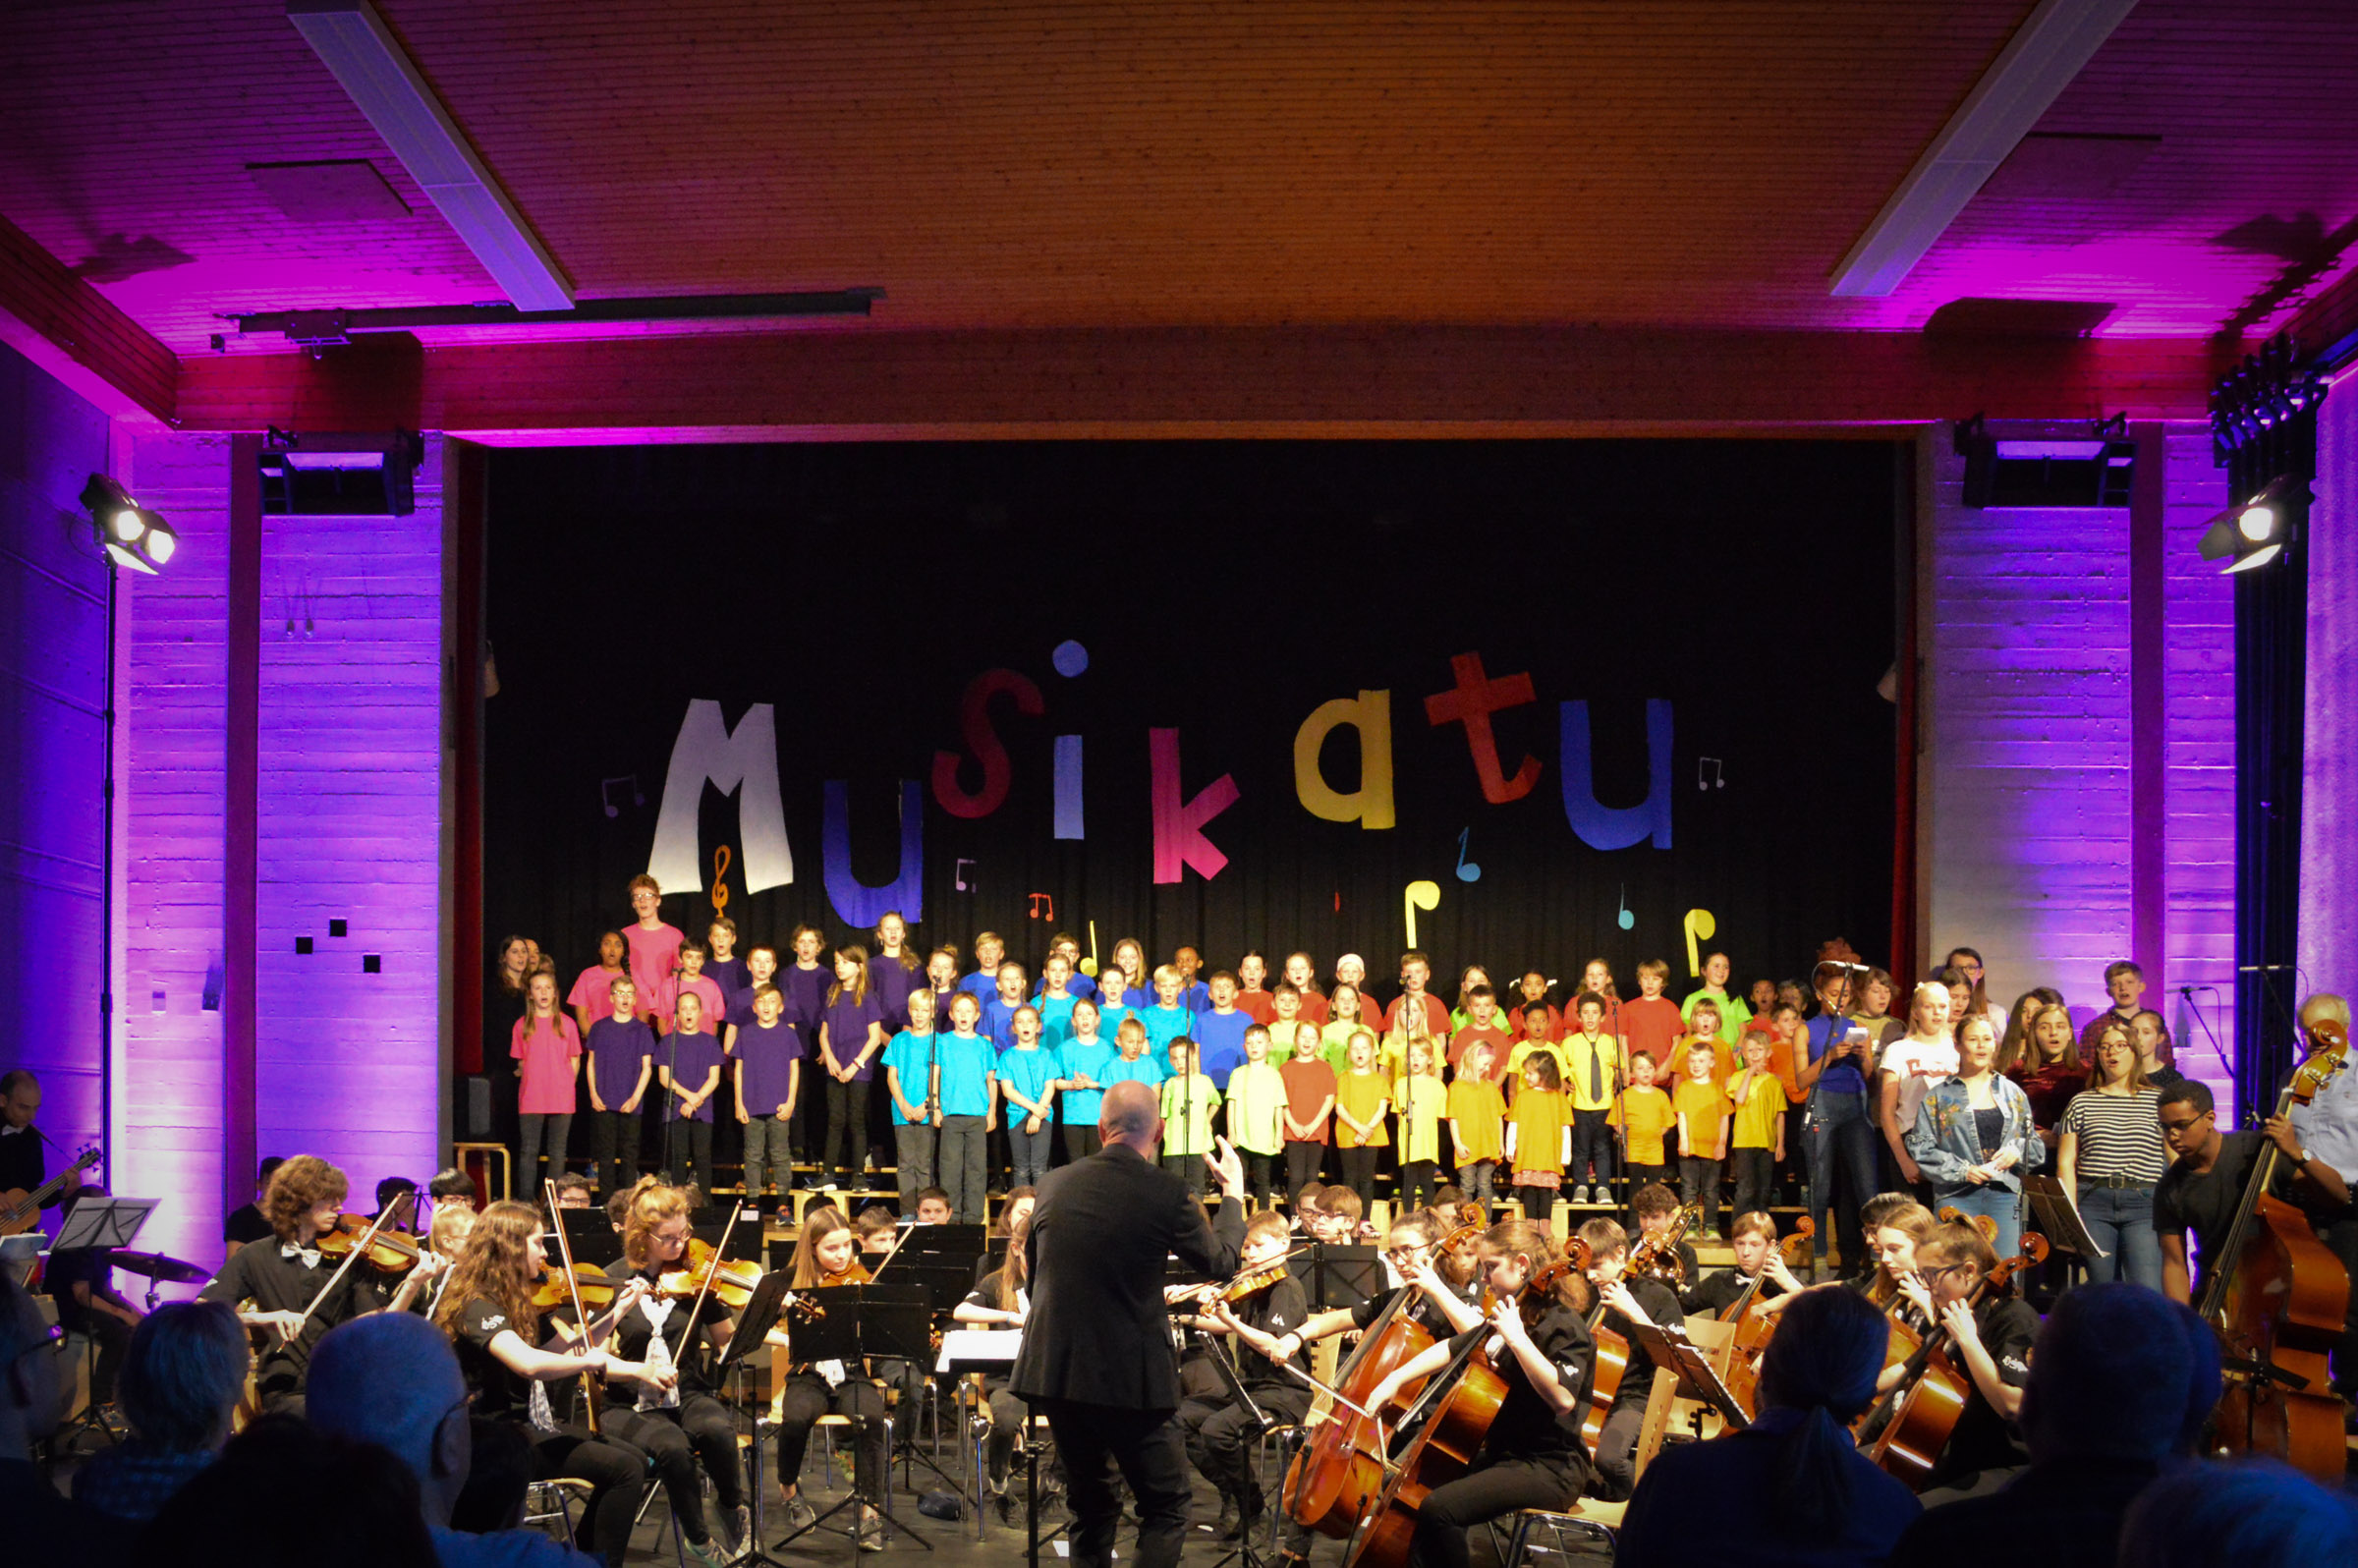 You are currently viewing Musikatu – Bring Musik in dein Leben